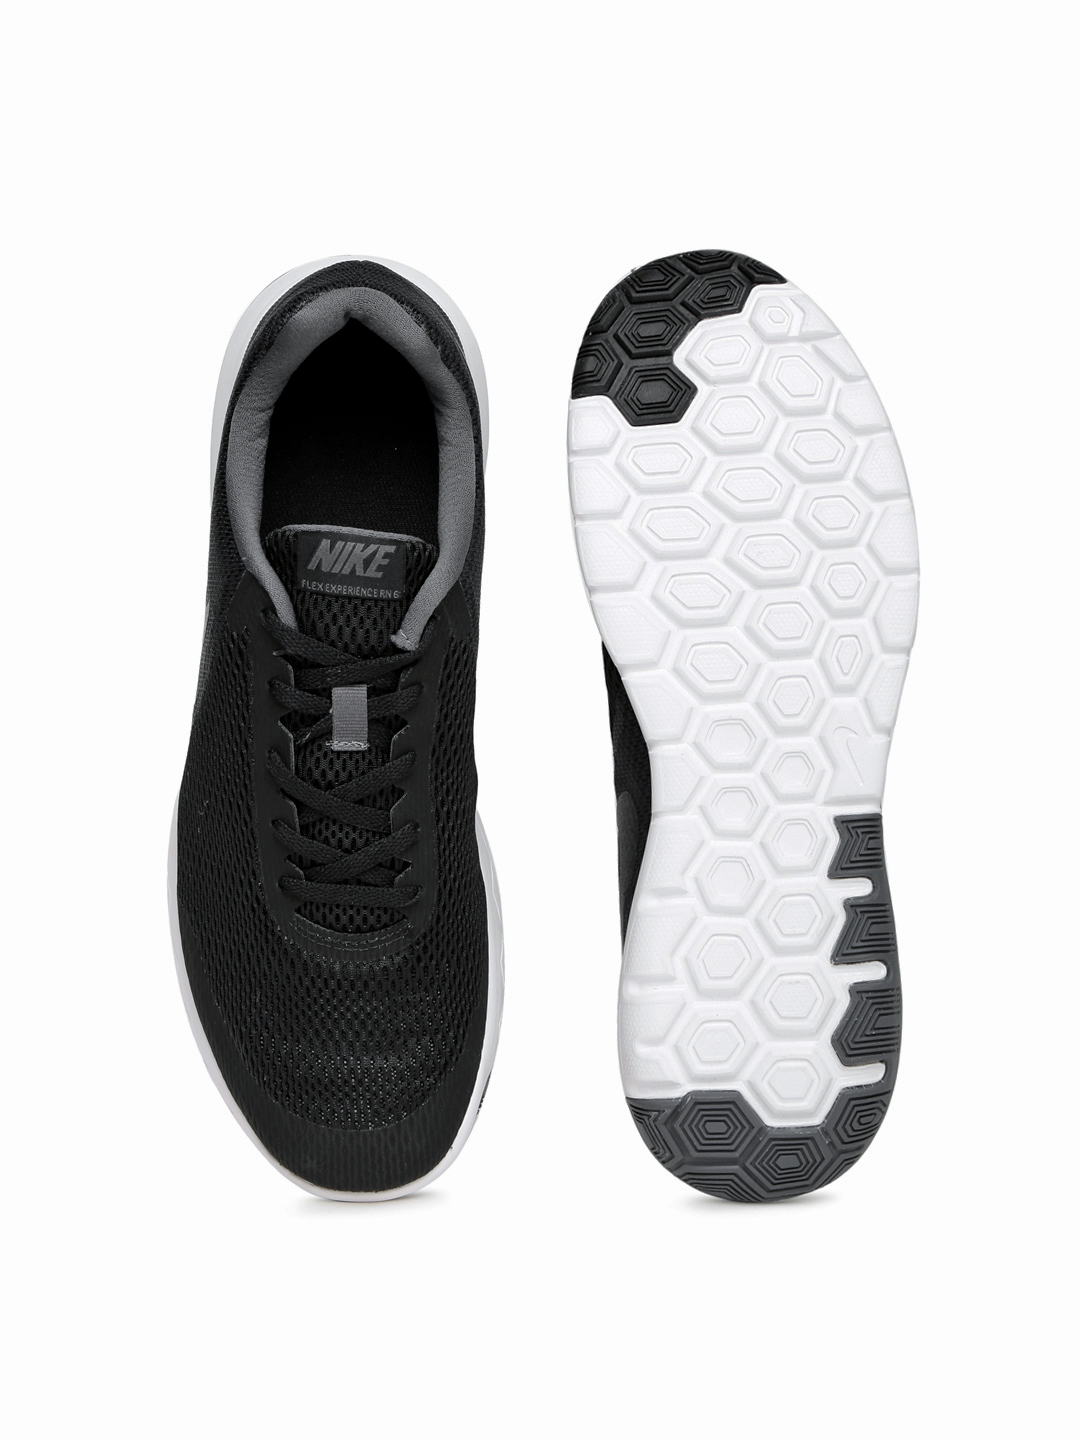 NIKE Flex Experience Rn 6 Black Running Shoes image 1